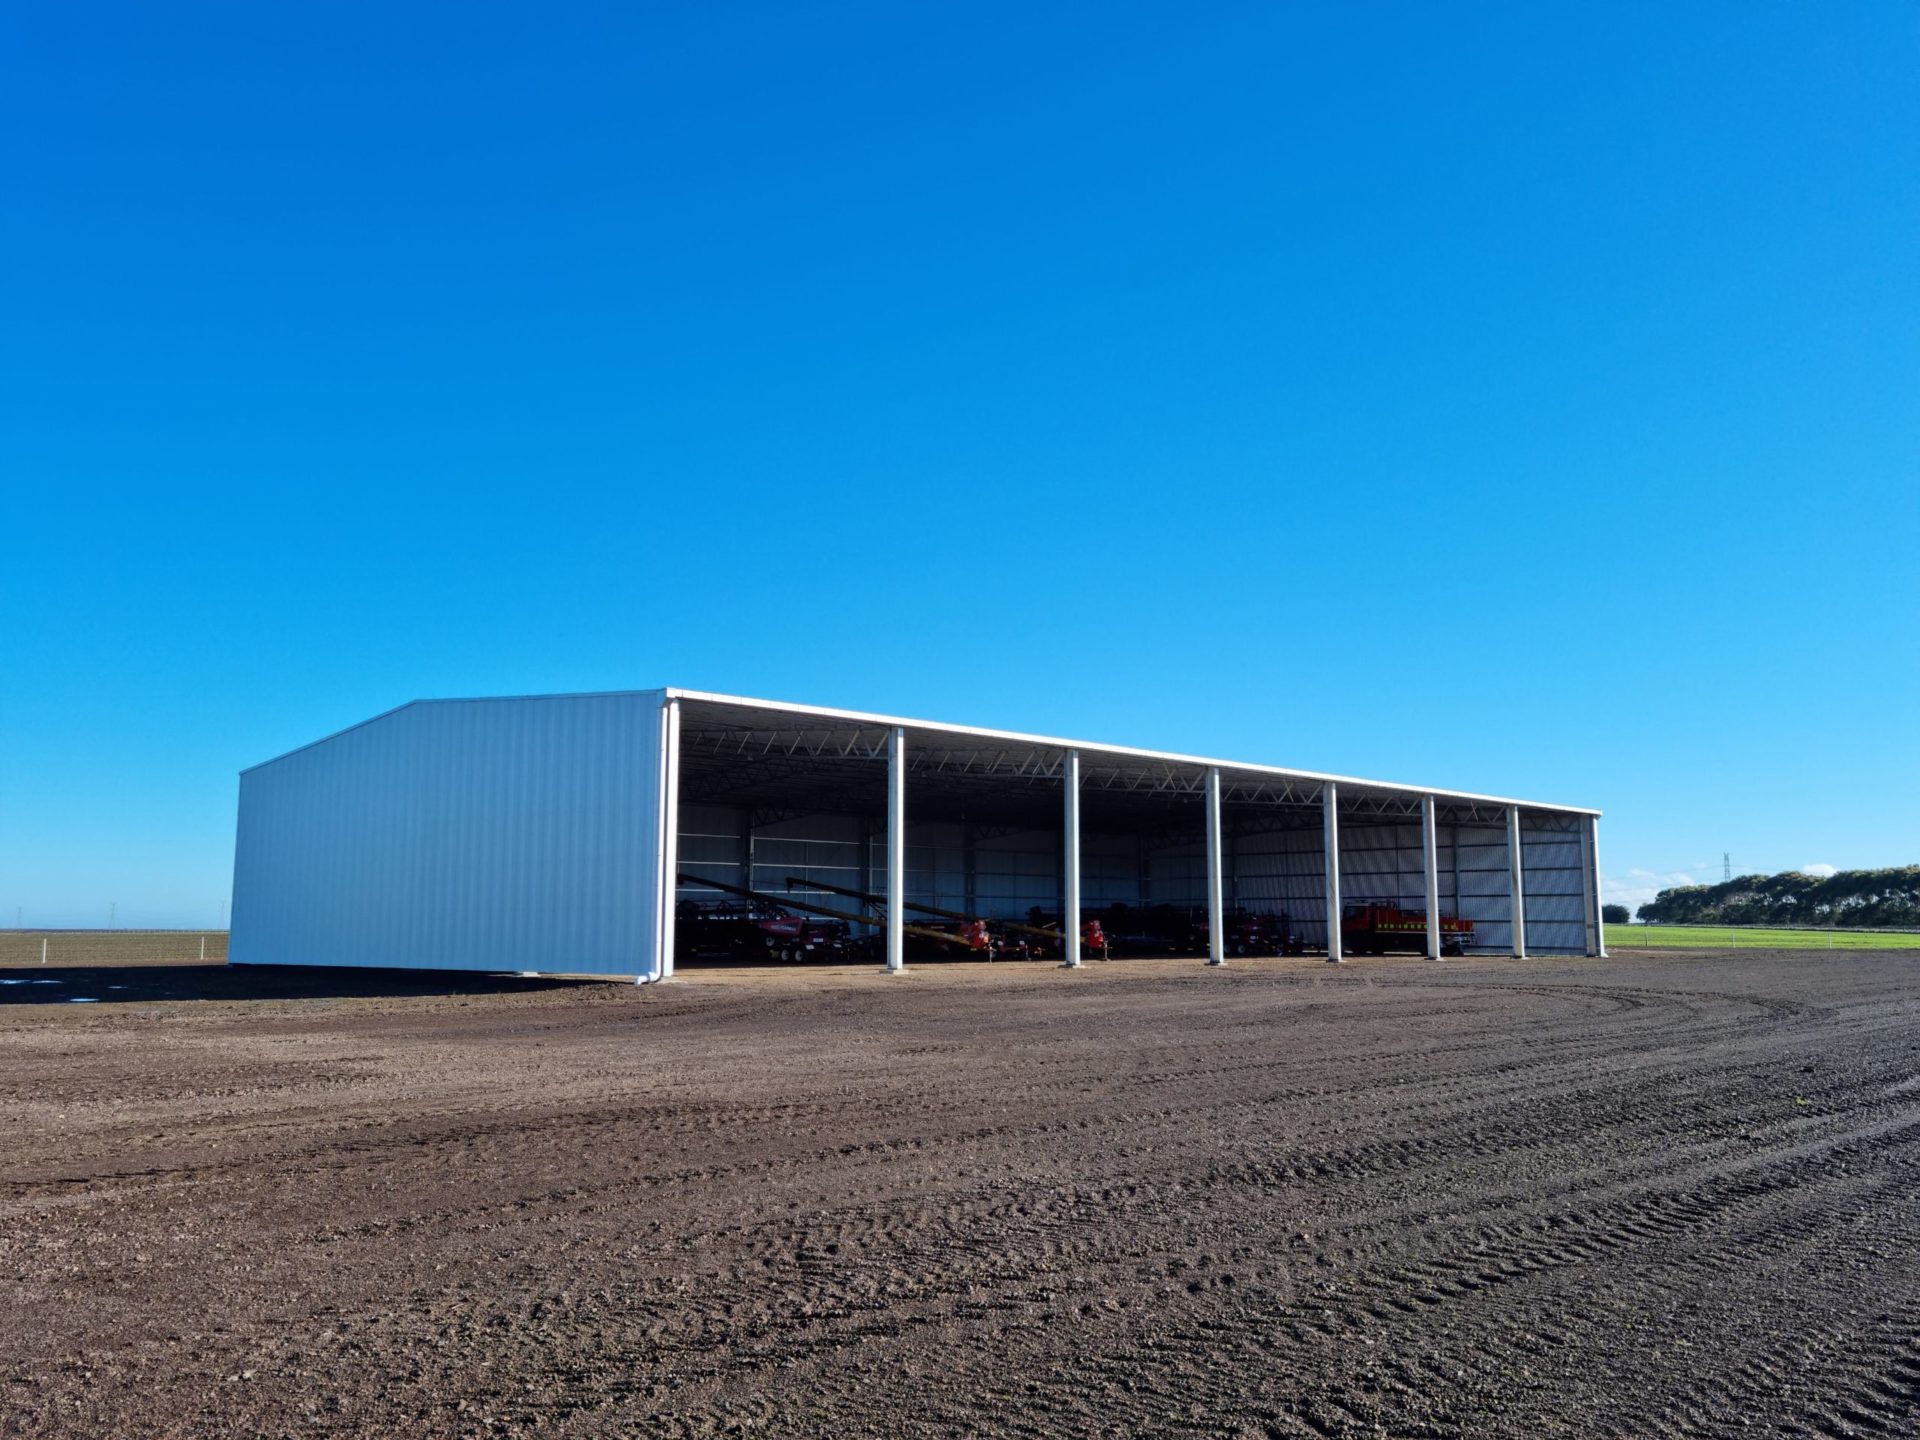 You are currently viewing 57.75m x 30m x 7.5m open-front machinery shed